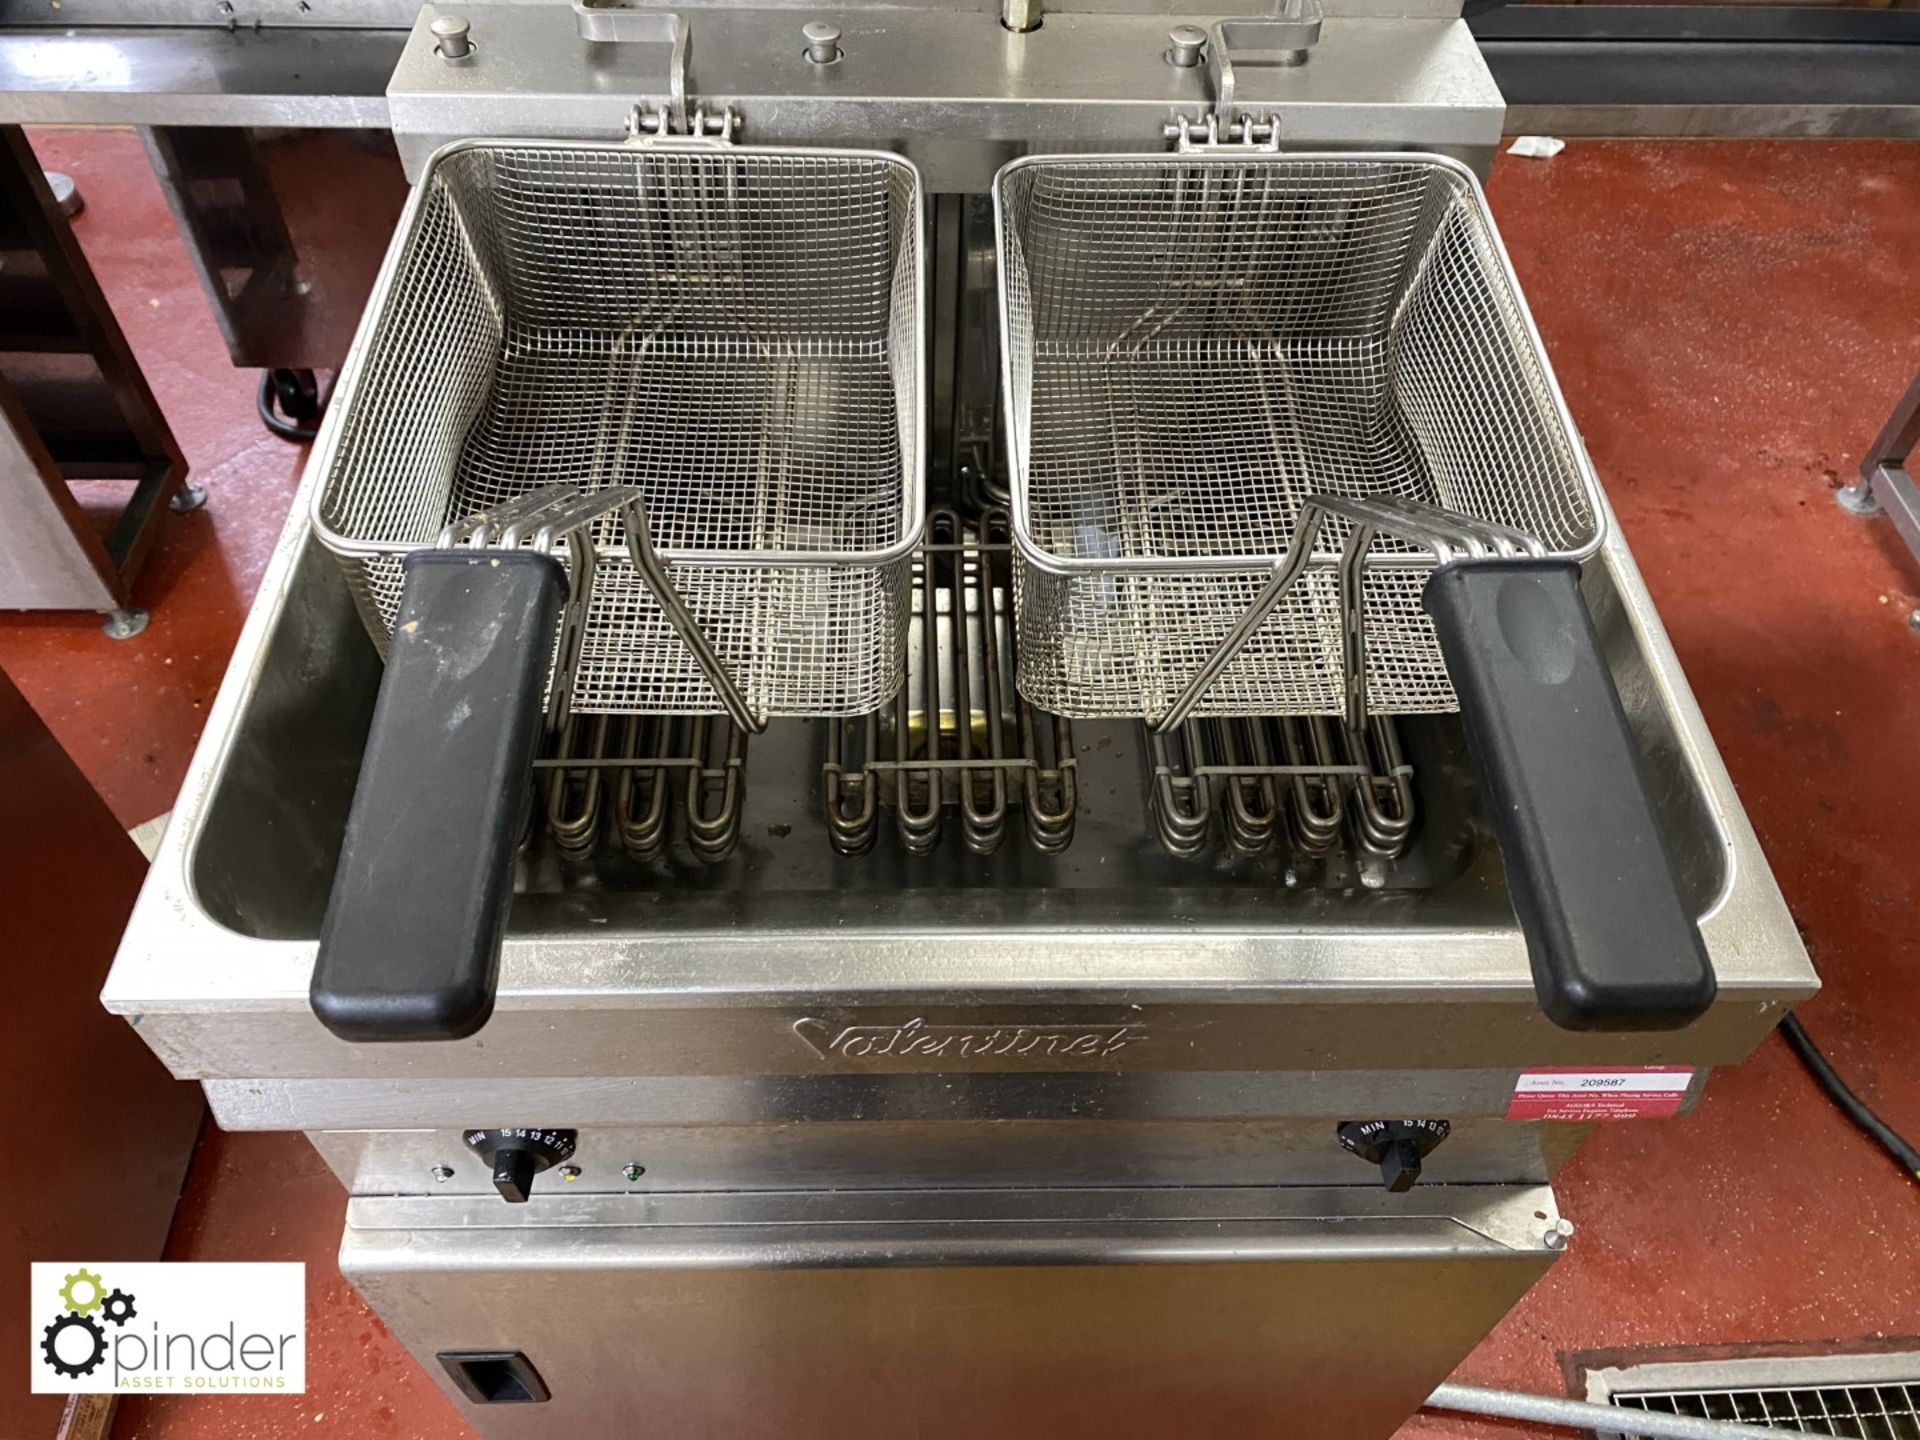 Valentine stainless steel twin basket Deep Fat Fryer, 415volts (located in Main Kitchen, - Image 2 of 3